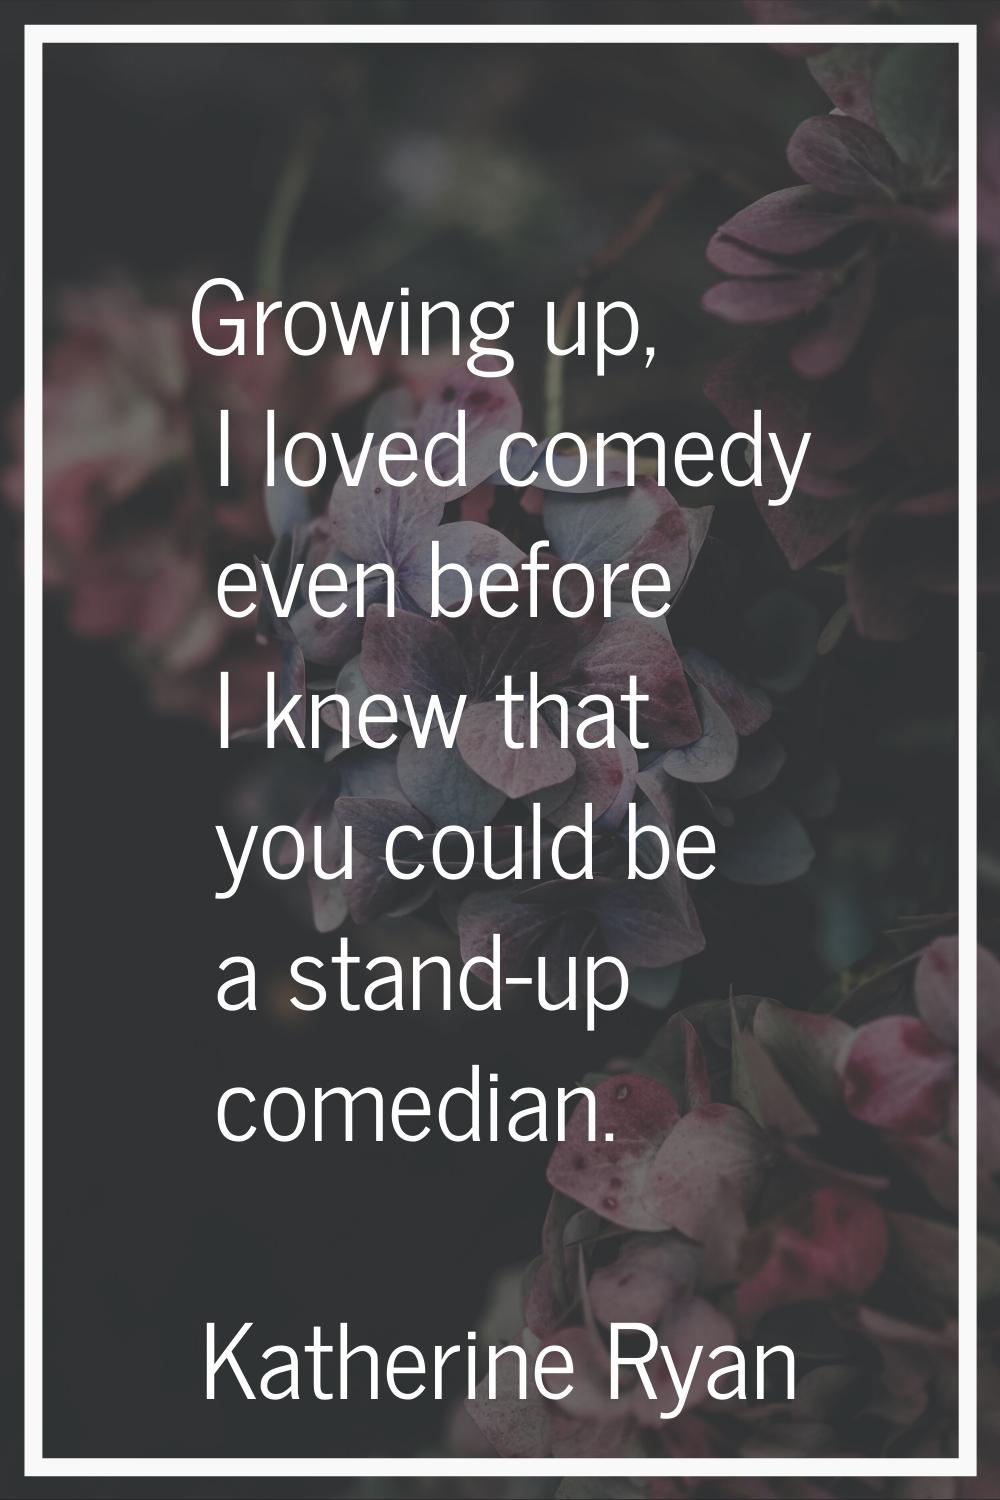 Growing up, I loved comedy even before I knew that you could be a stand-up comedian.